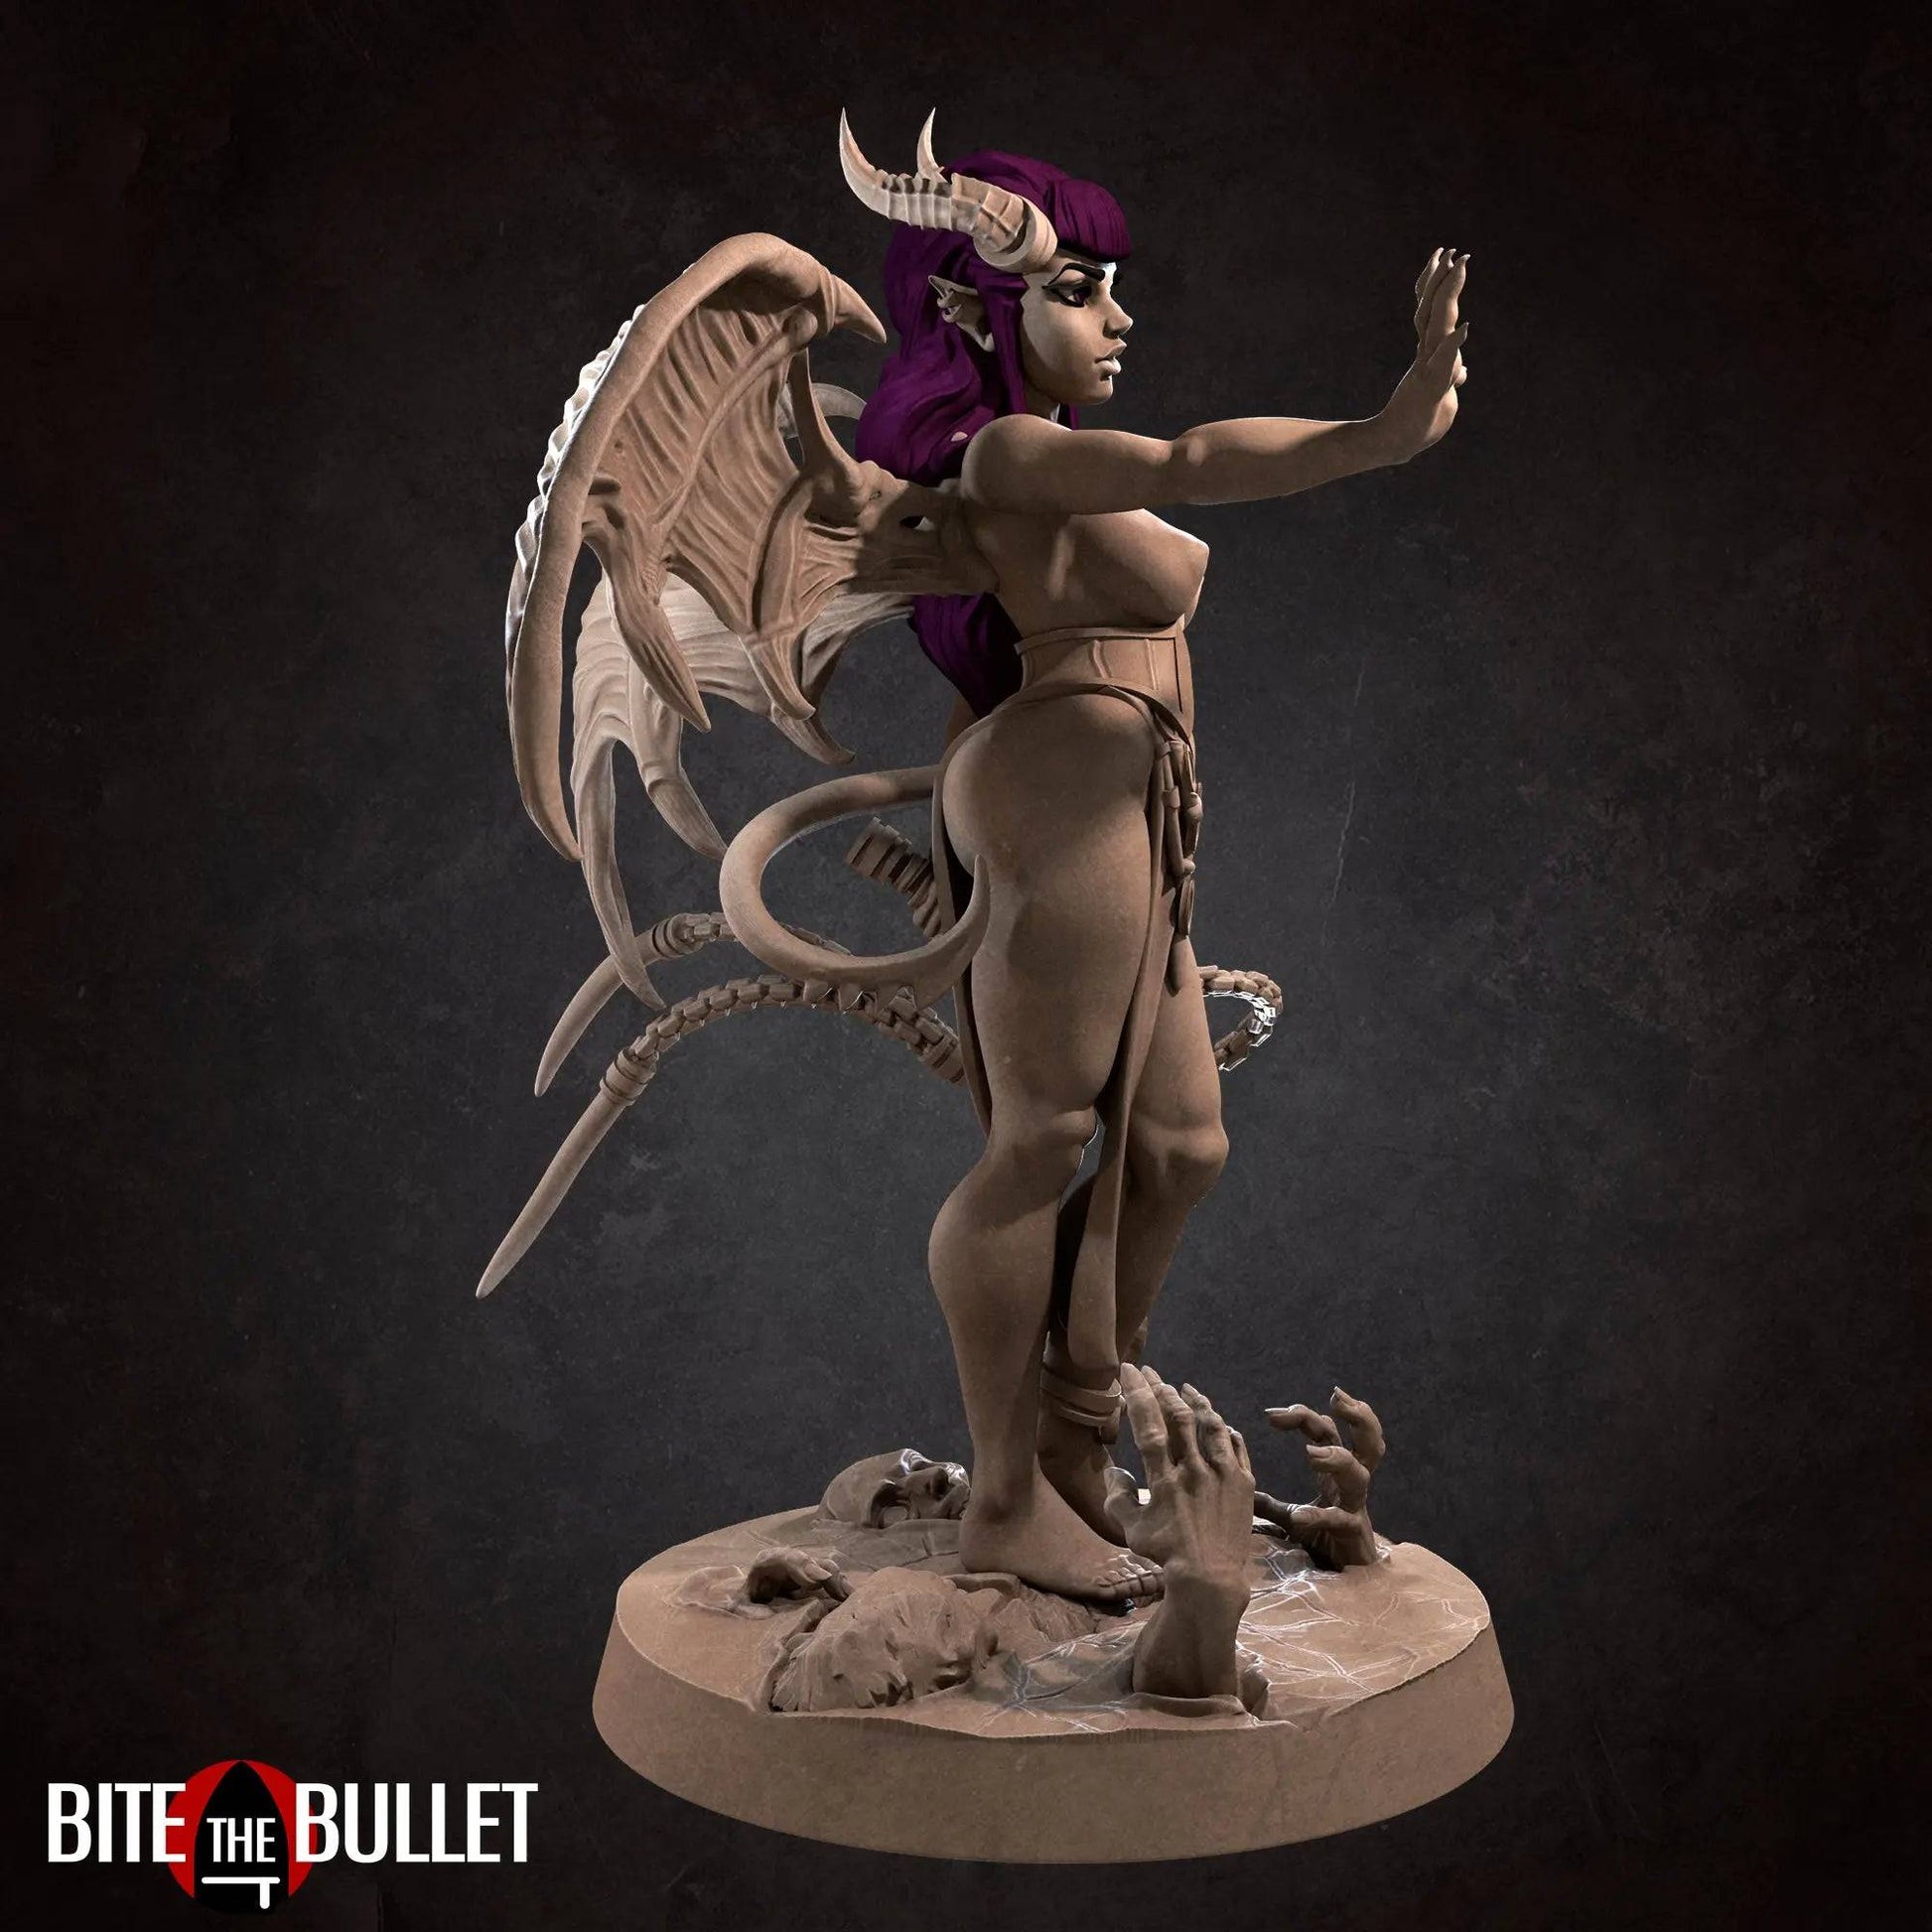 Scarlet, Pinup SFW NSFW Lovely Woman, Succubus with Whip | D&D Miniature Pinup | Bite the Bullet - Tattles Told 3D